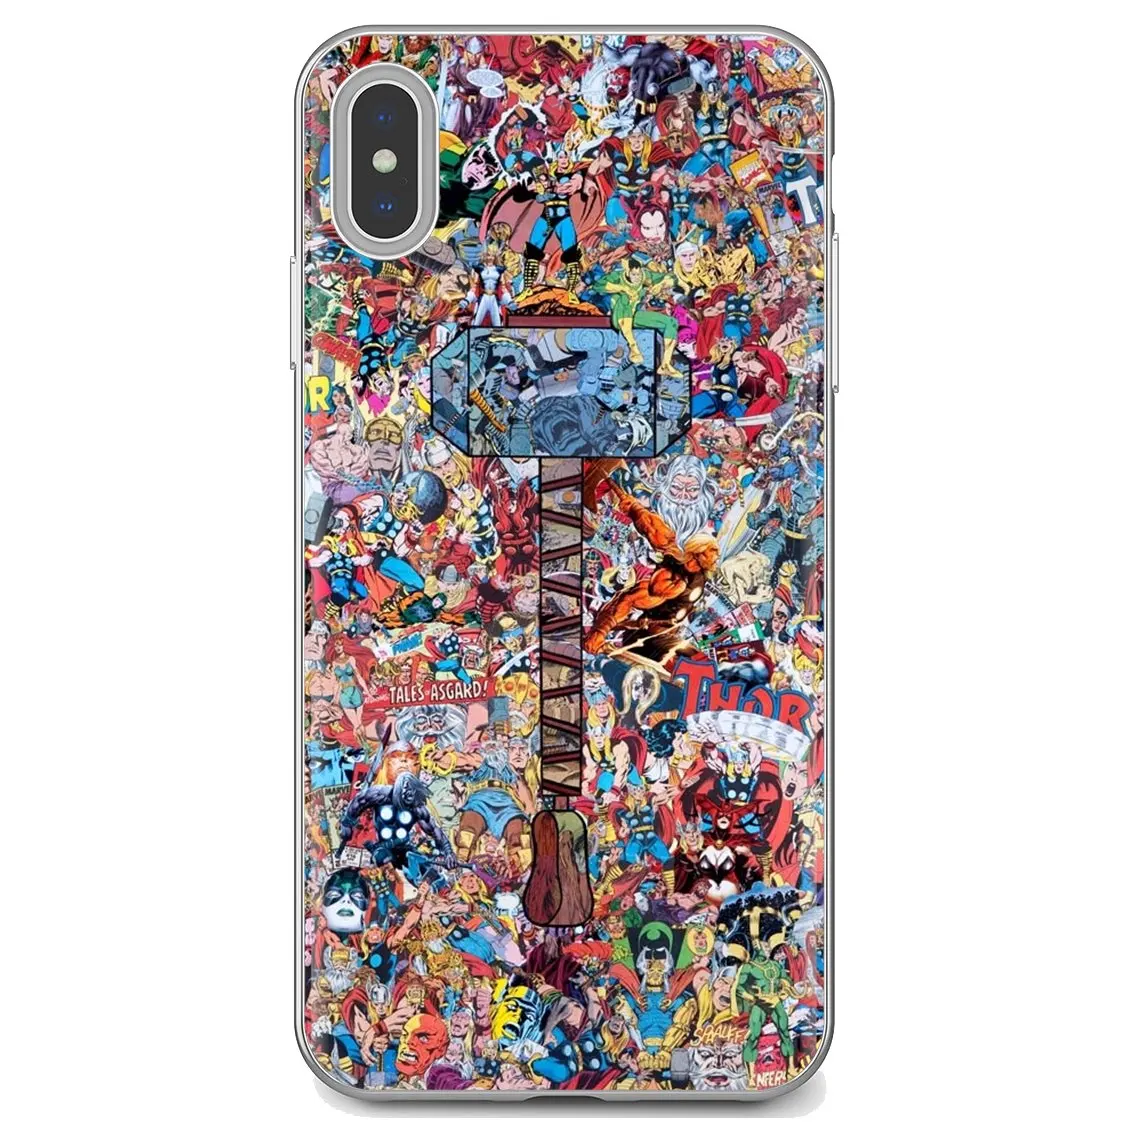 Comic Super Heroes Thor doctor who For Huawei Y6 Y5 2019 For Xiaomi Redmi Note 4 5 6 7 8 Pro Mi A1 A2 A3 6X 5X 7A Soft Skin Case xiaomi leather case hard Cases For Xiaomi